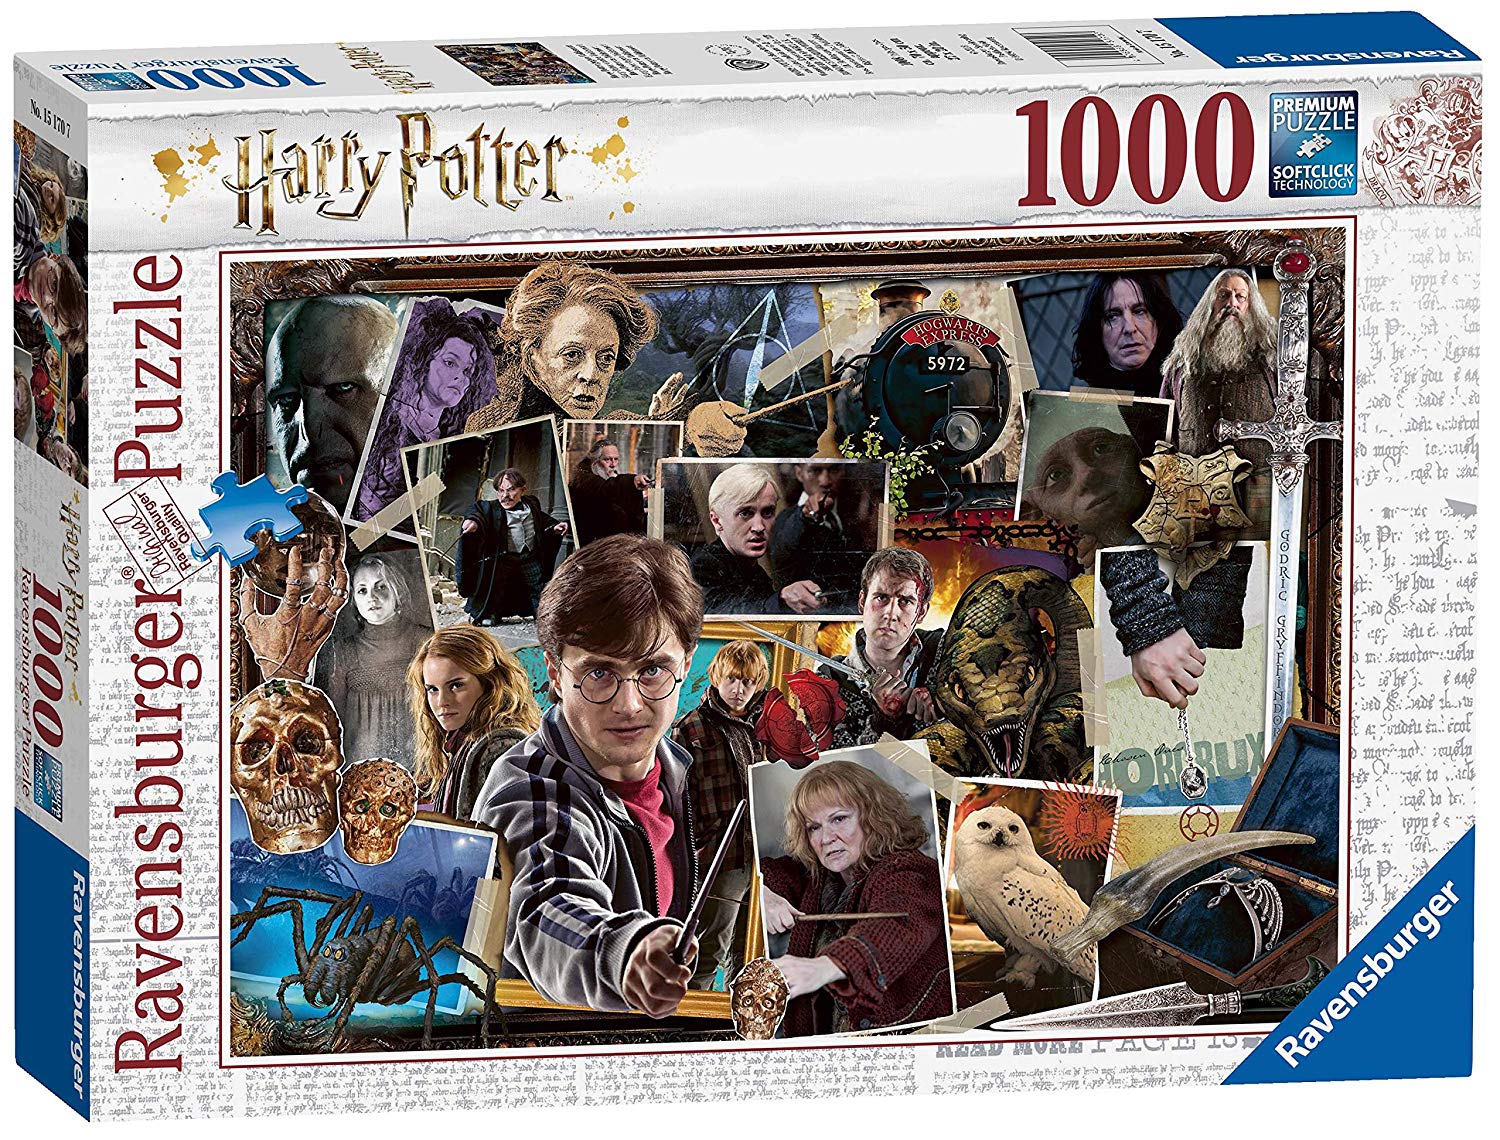 Harry Potter Voldemort 1 1000 Pcs Piece Jigsaw Puzzle Game